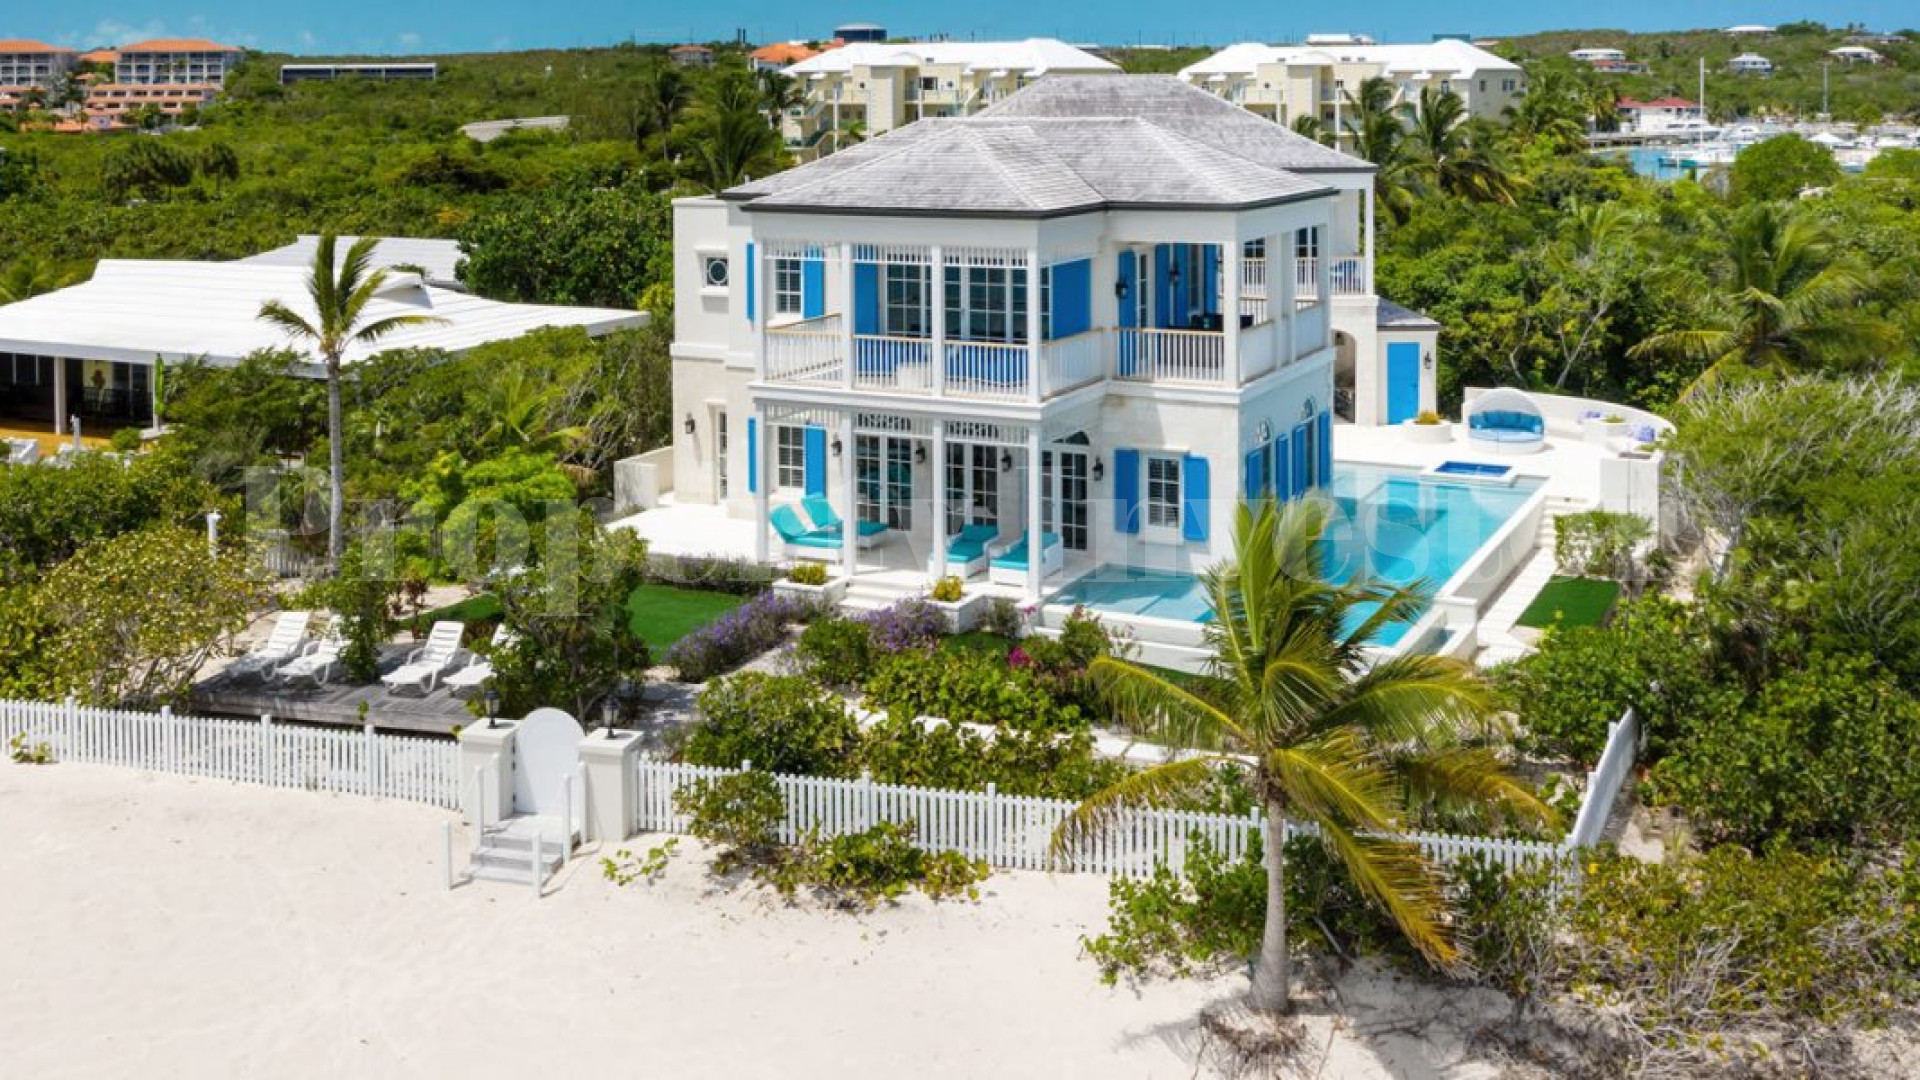 Fabulous 5 Bedroom Colonial Style Beachfront Home for Sale in Turks & Caicos